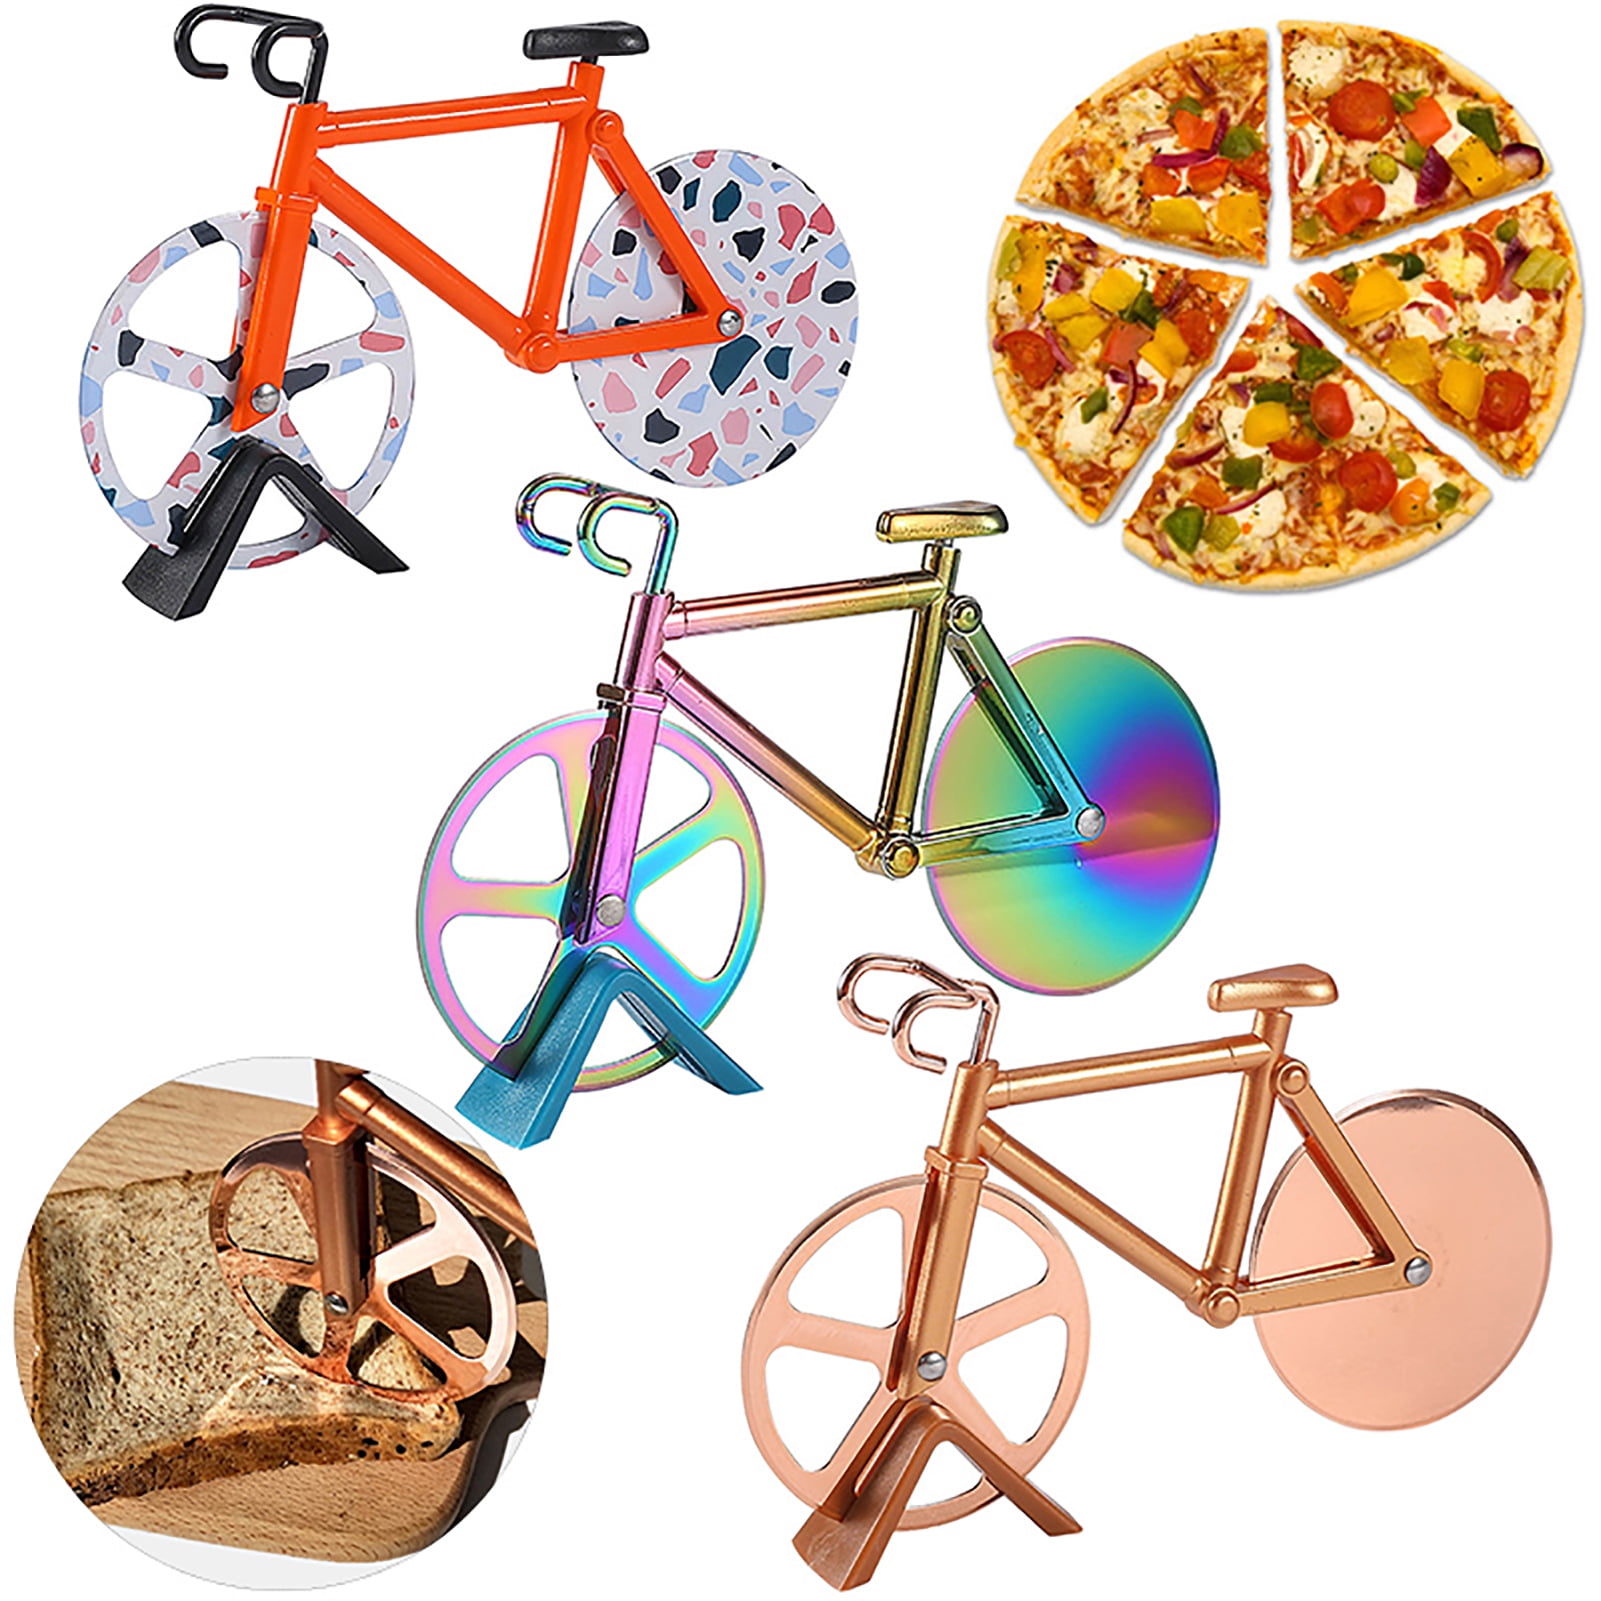 Stainless Steel Double Bike Pizza Cutter Road Bicycle Chopper for Home Pizza Tools 1PCS-red Non-Stick Pizza Roller Wheels with a Stand Bicycle Pizza Cutter 